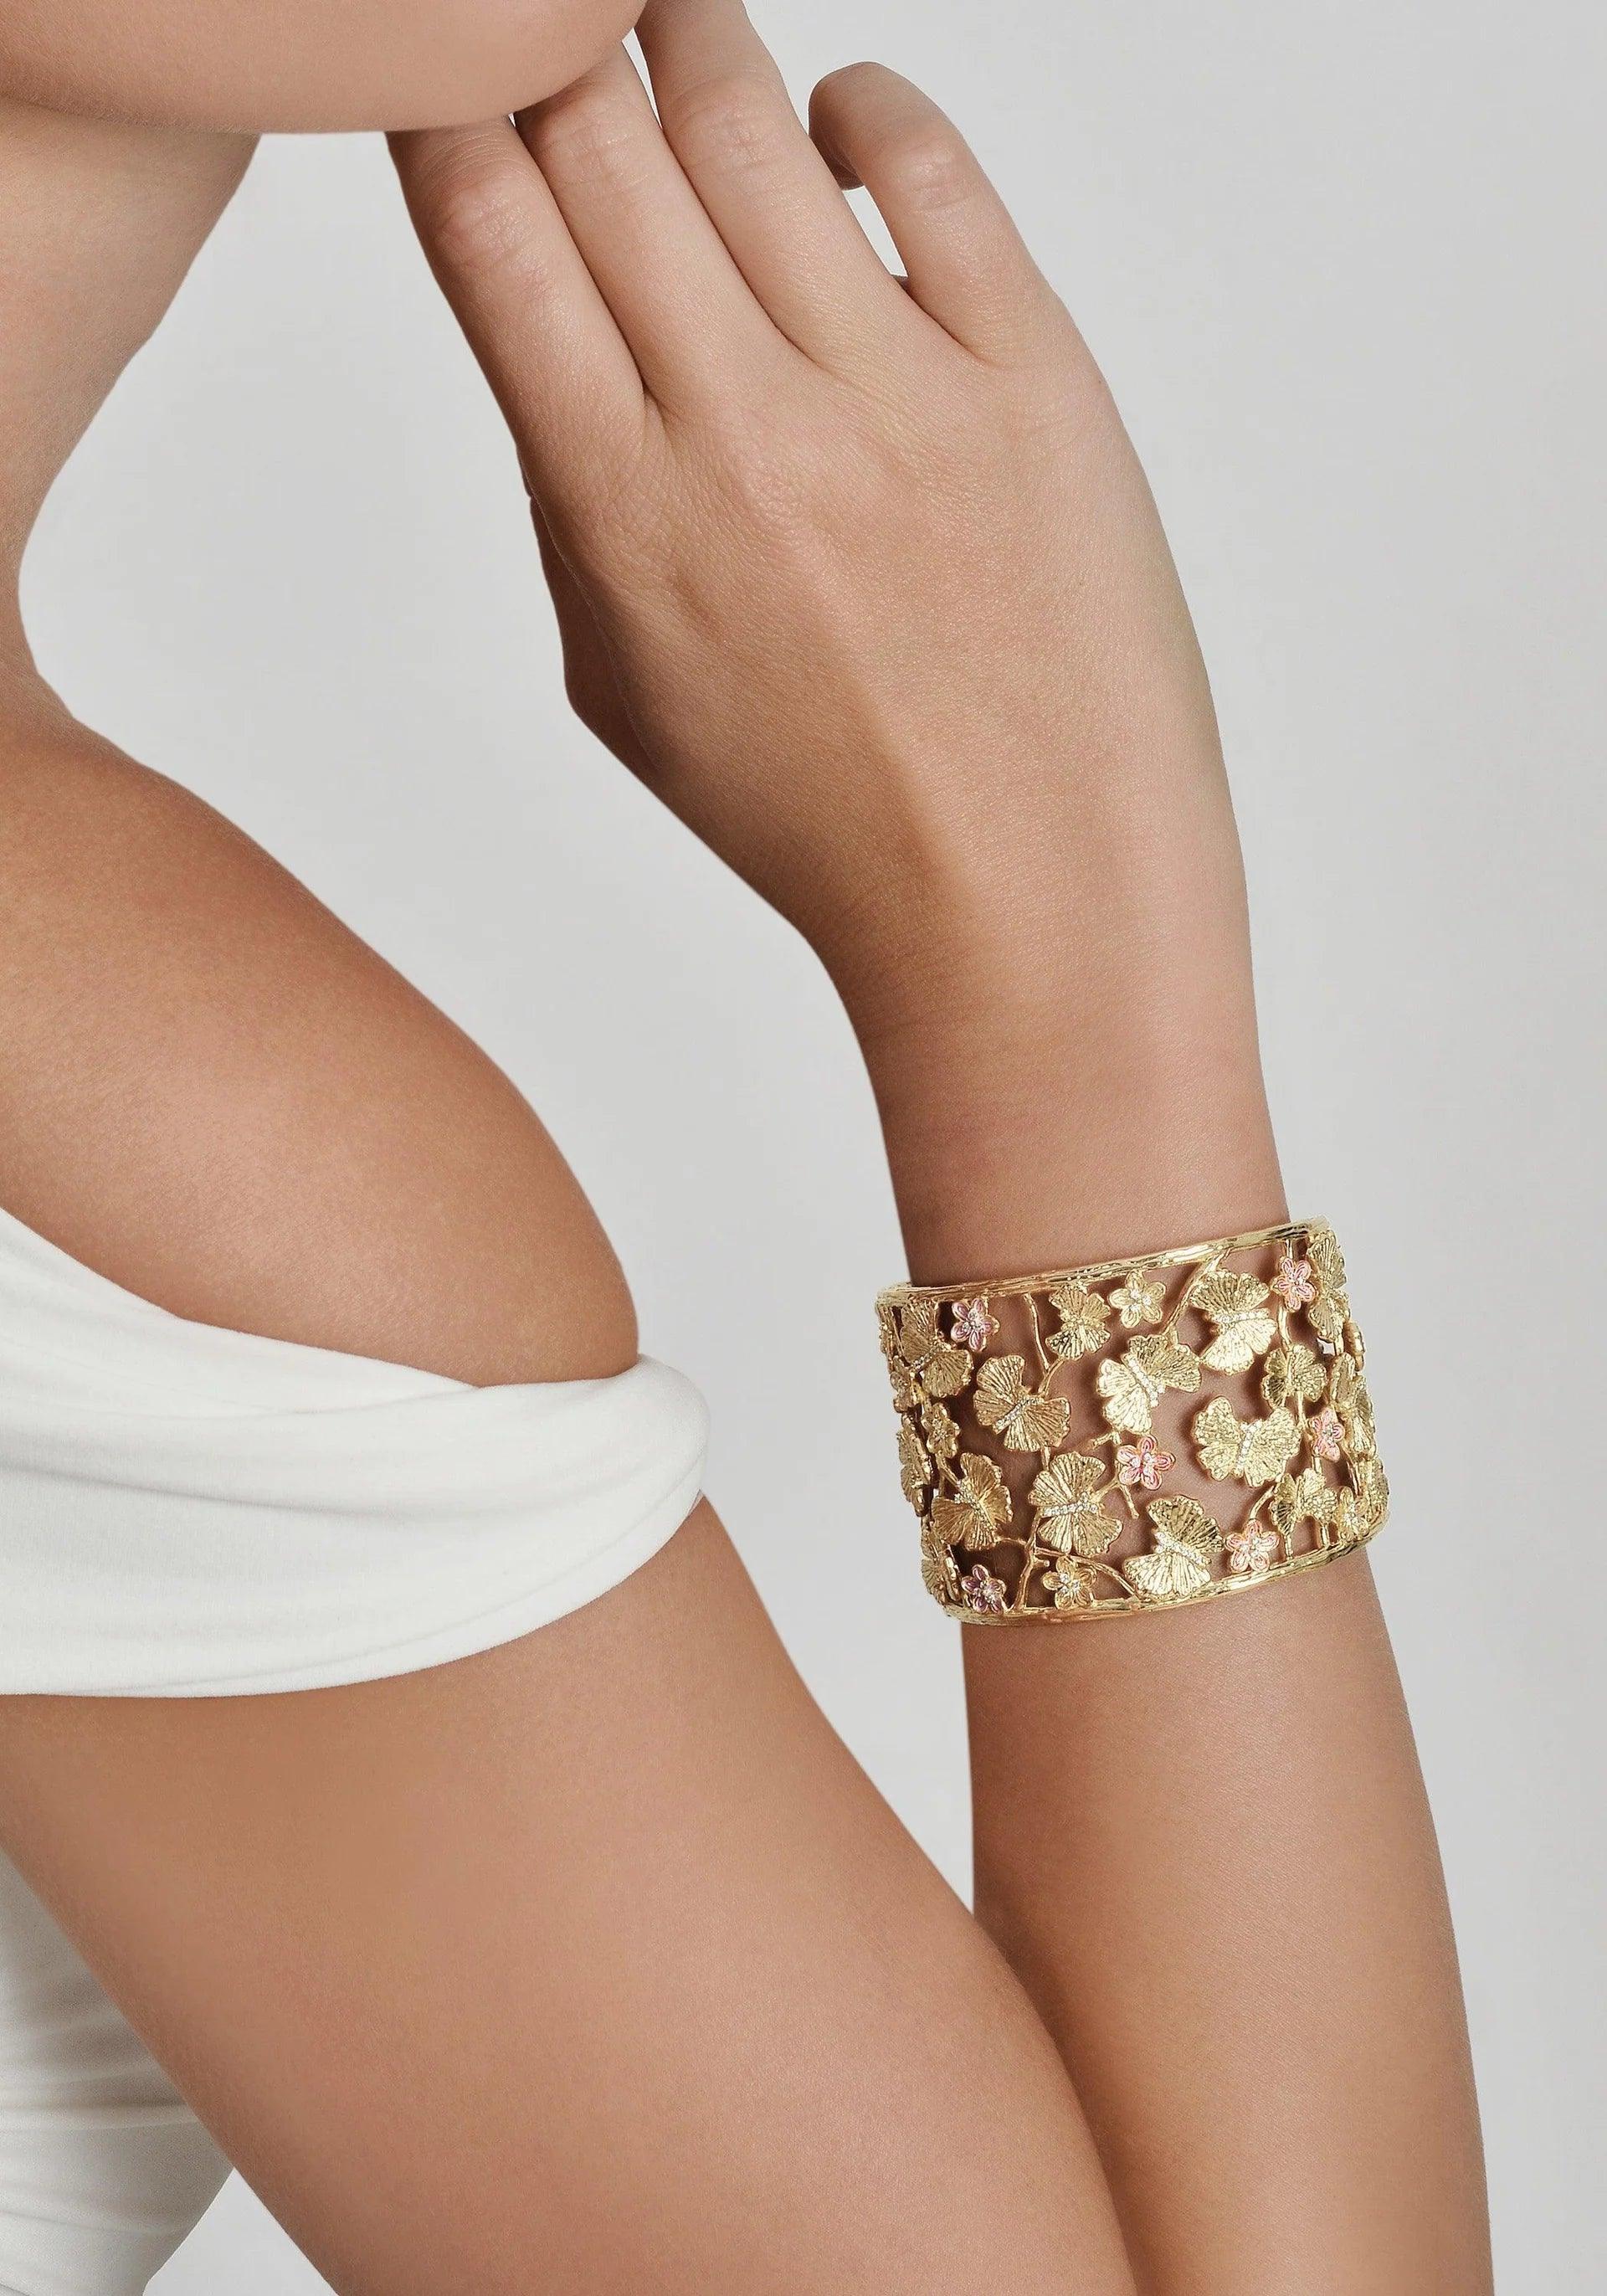 Butterfly With Flowers Cuff Bracelet - BTK COLLECTION